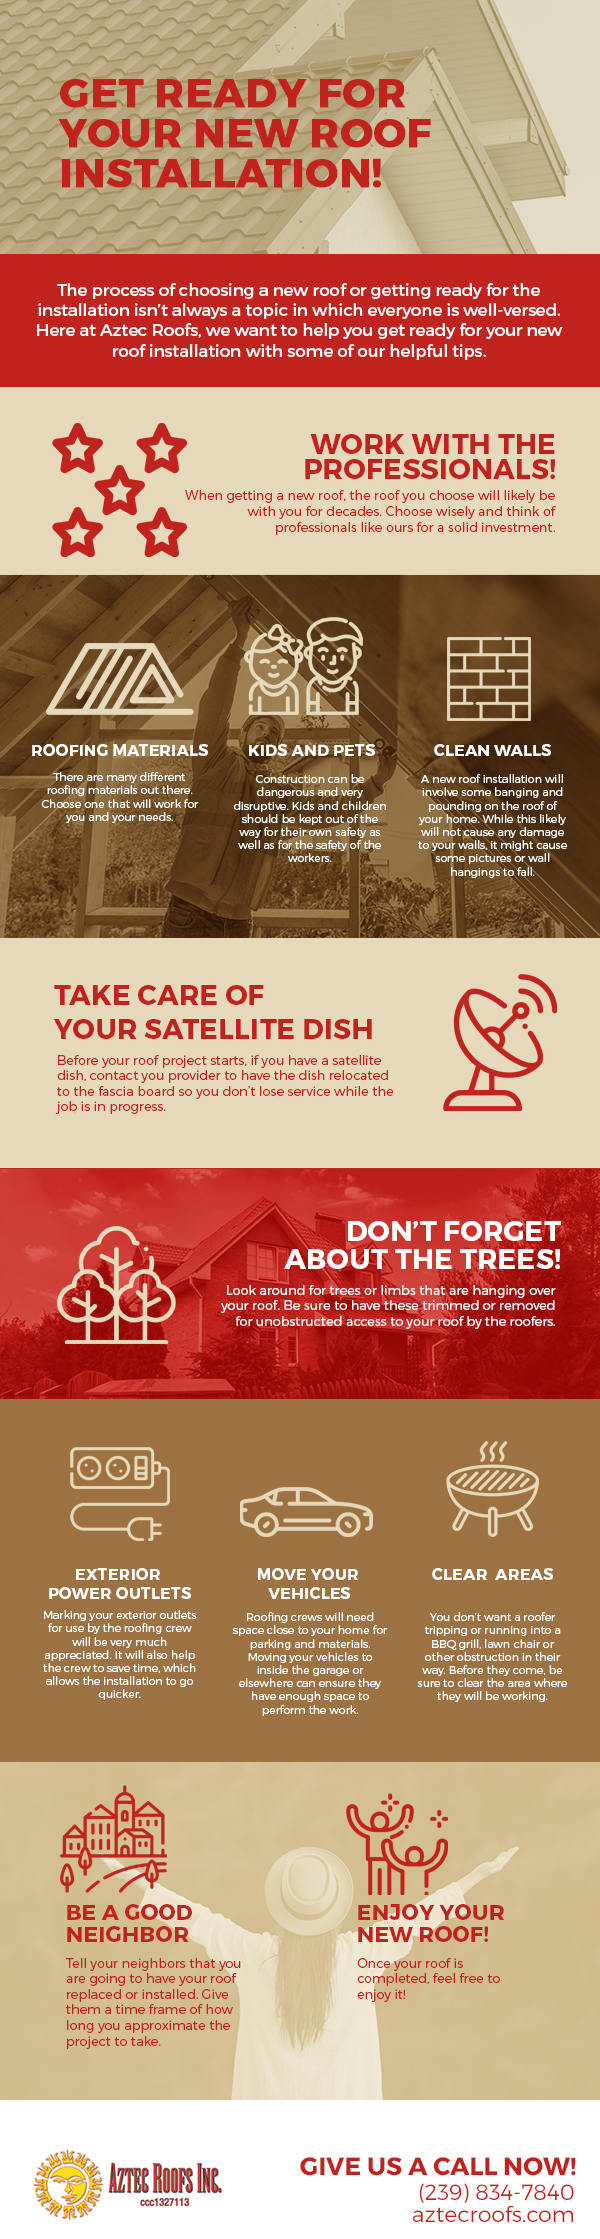 Get Ready for Your New Roof Installation! [infographic]